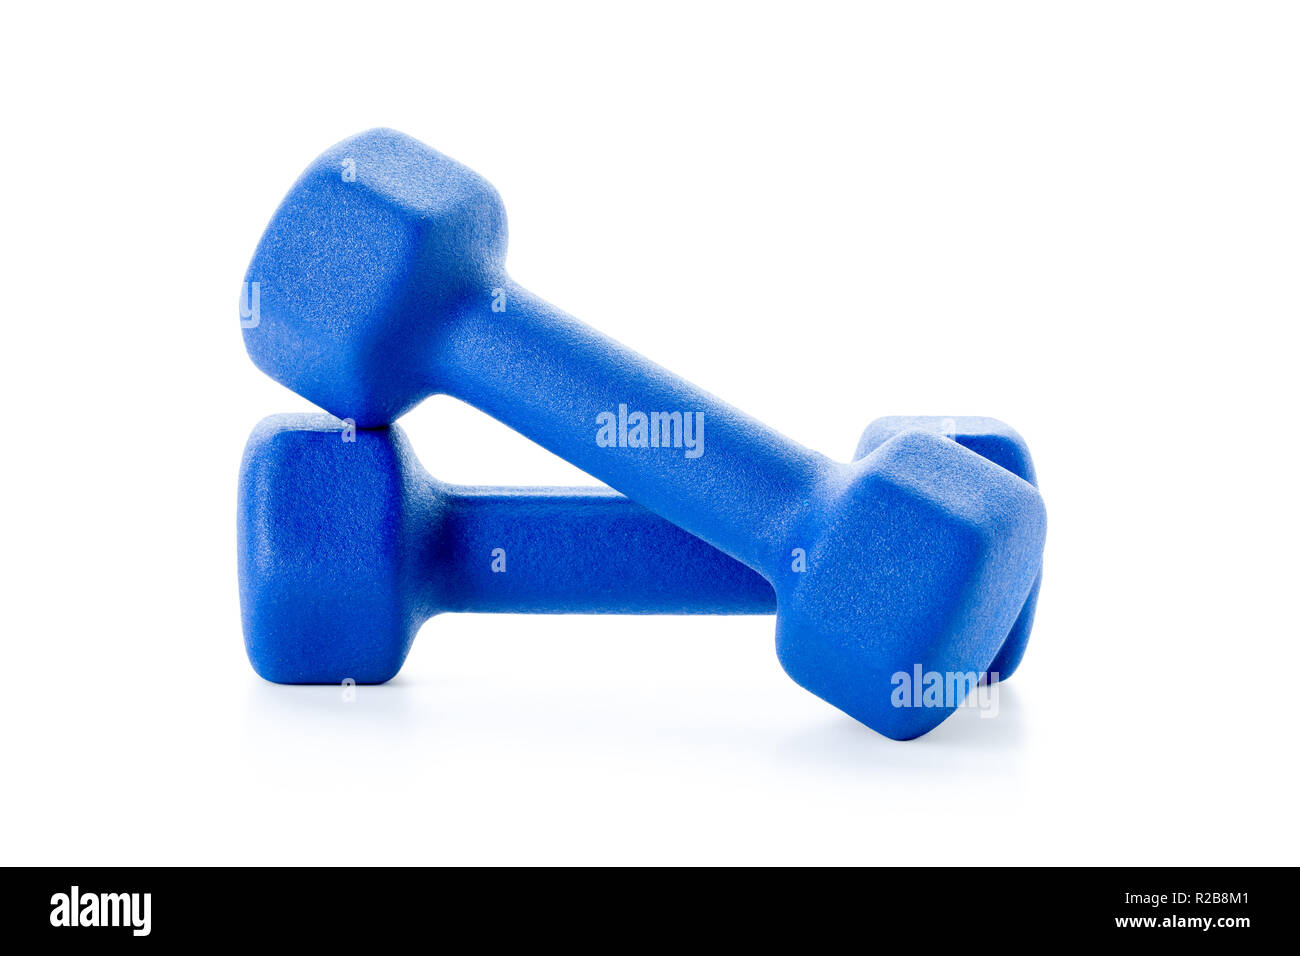 Two small blue dumbbells isolated on white background, clipping-path included, excluding the cast shadow Stock Photo